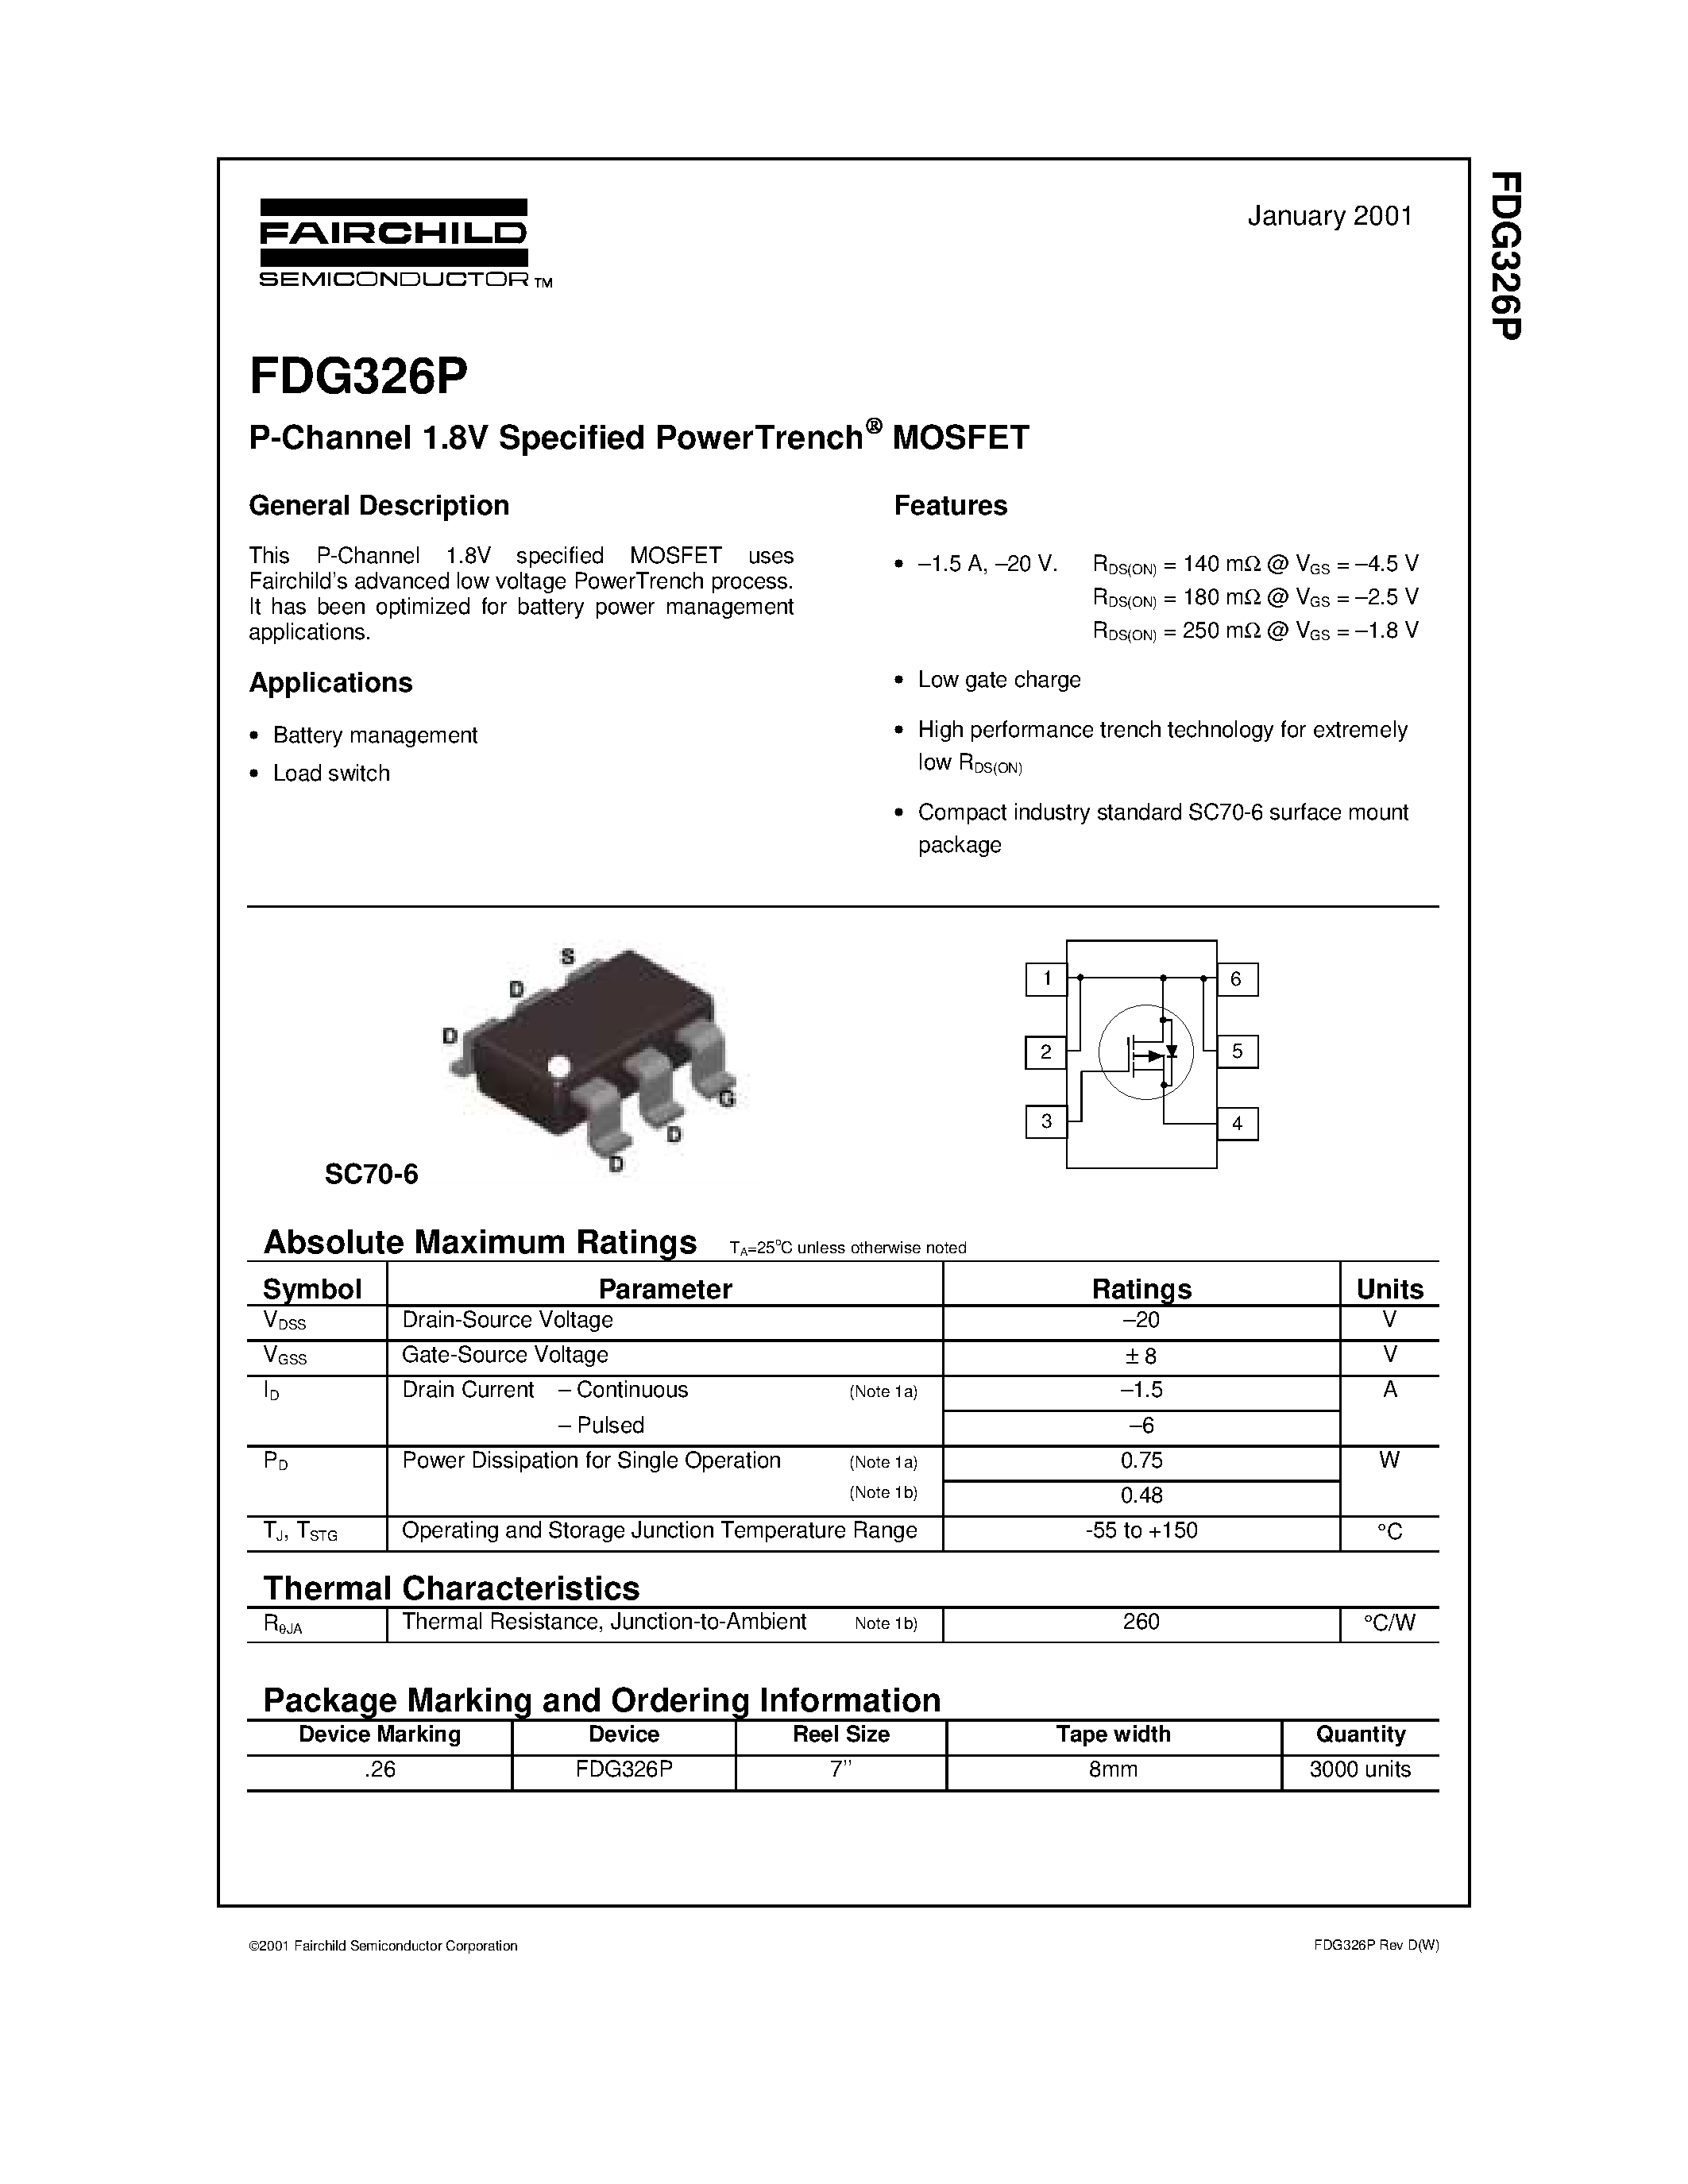 Datasheet FDG326P - P-Channel 1.8V Specified PowerTrench MOSFET page 1